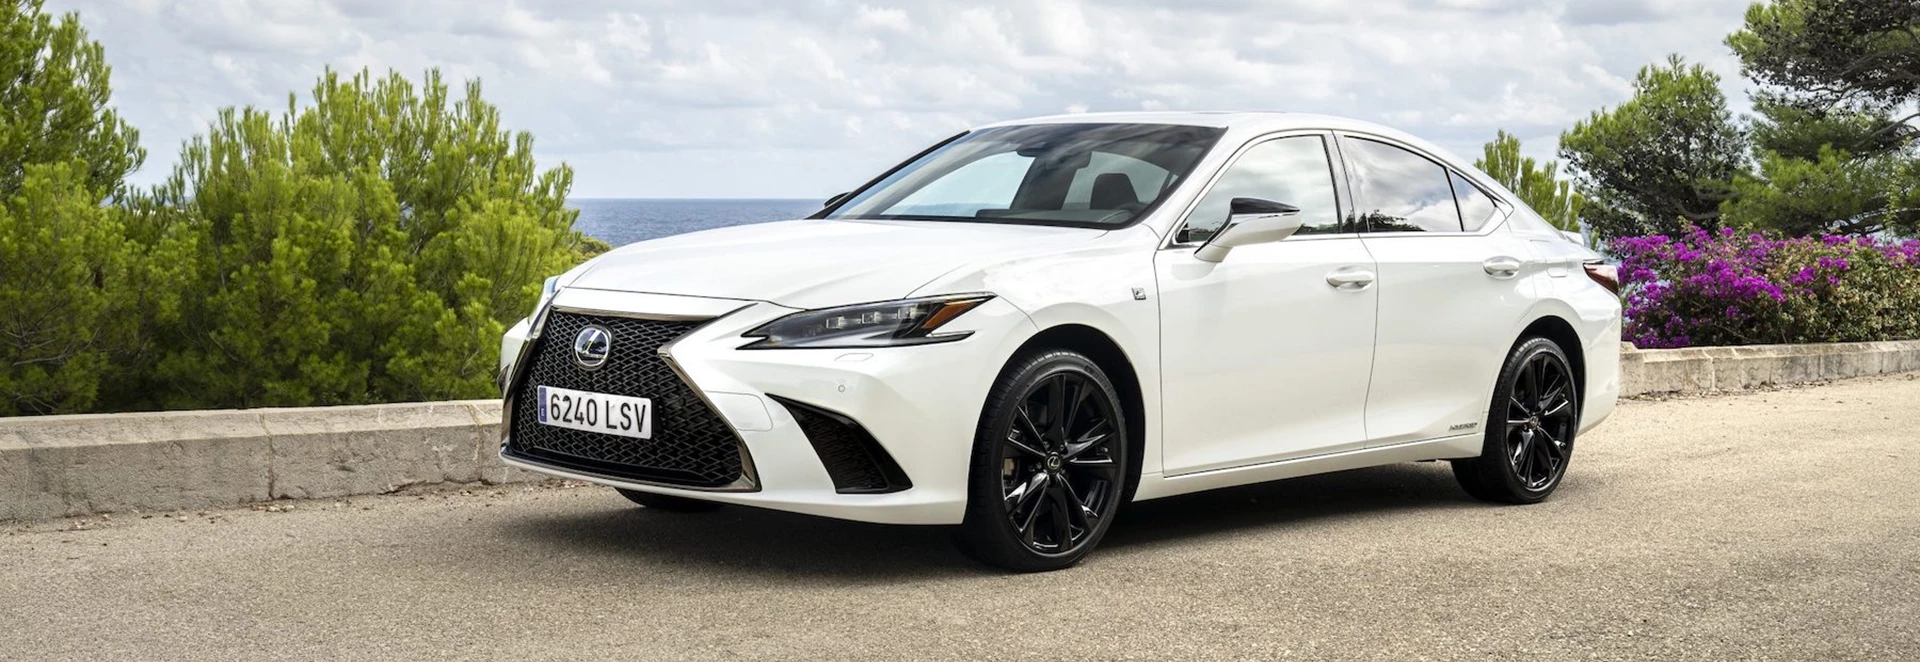 Updated Lexus ES launched with new range of technology 